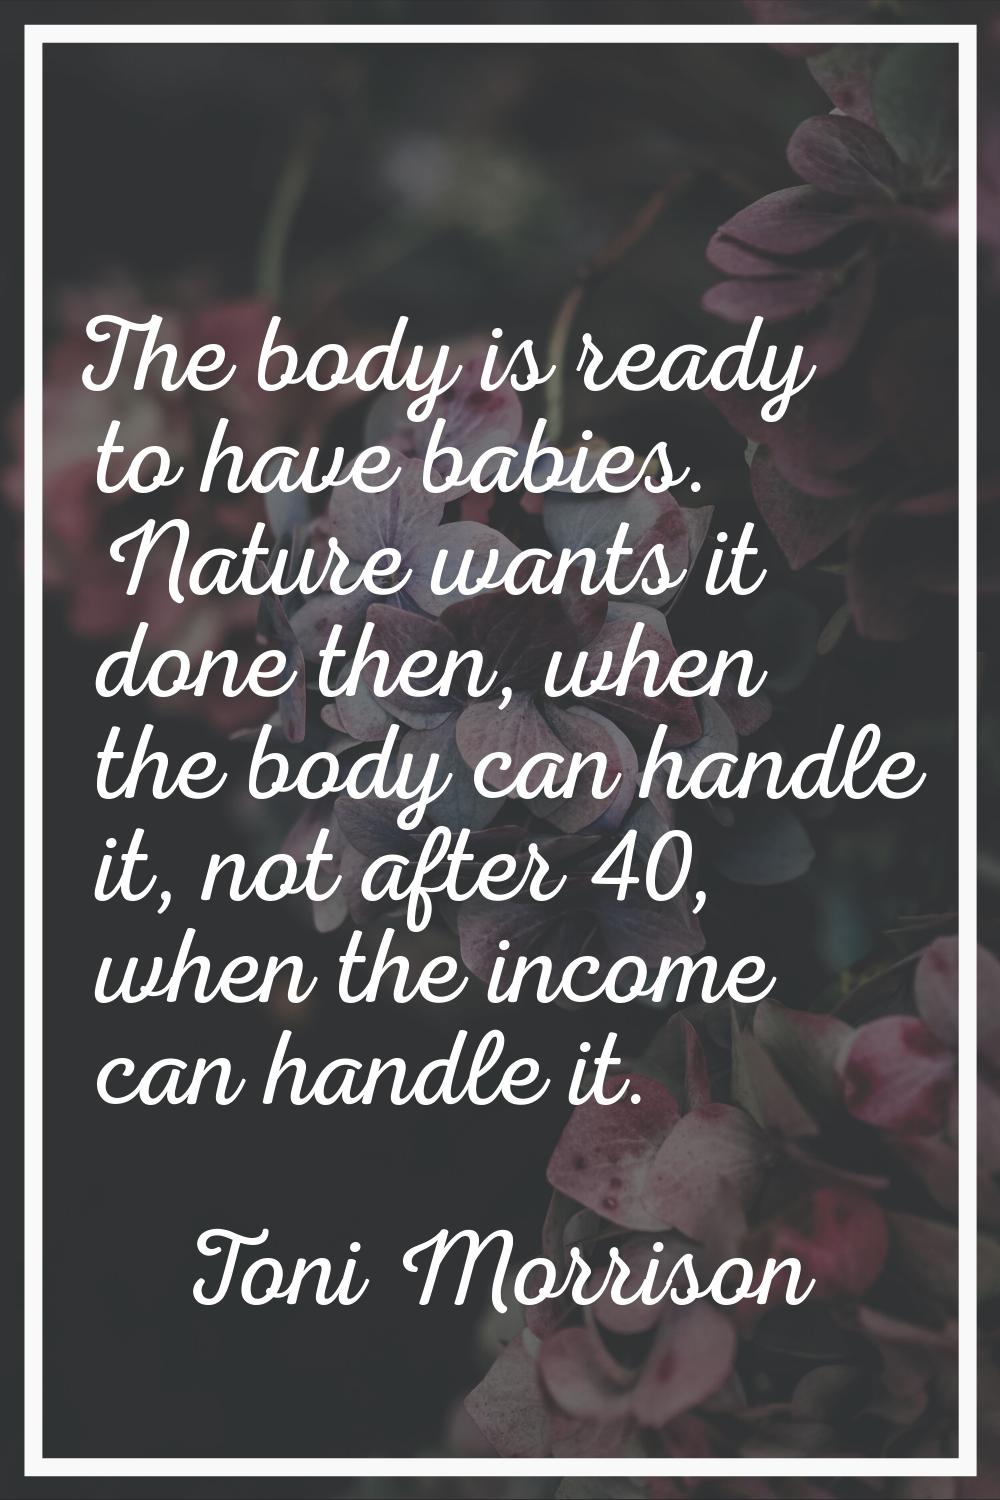 The body is ready to have babies. Nature wants it done then, when the body can handle it, not after